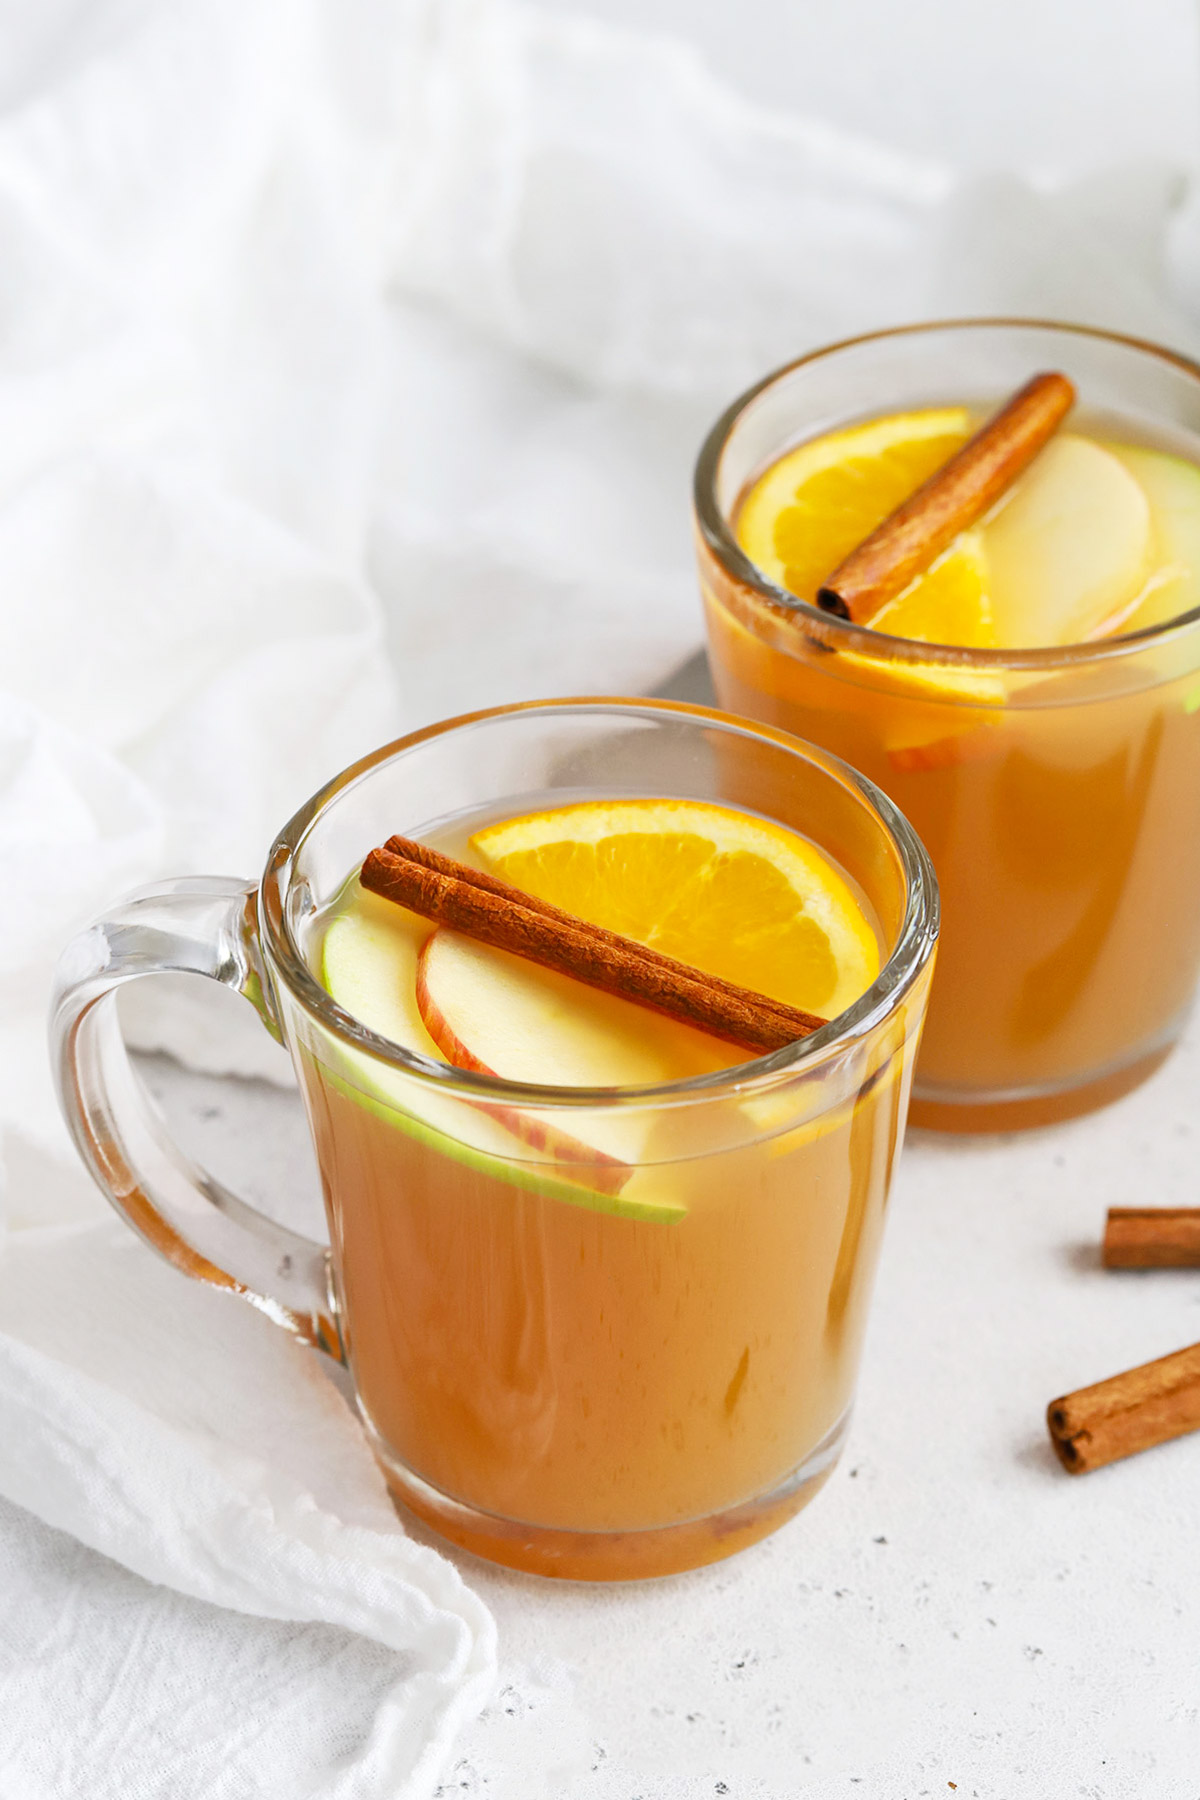 Front view of glass mugs of hot spiced cider garnished with apple slices, orange slices, and cinnamon sticks